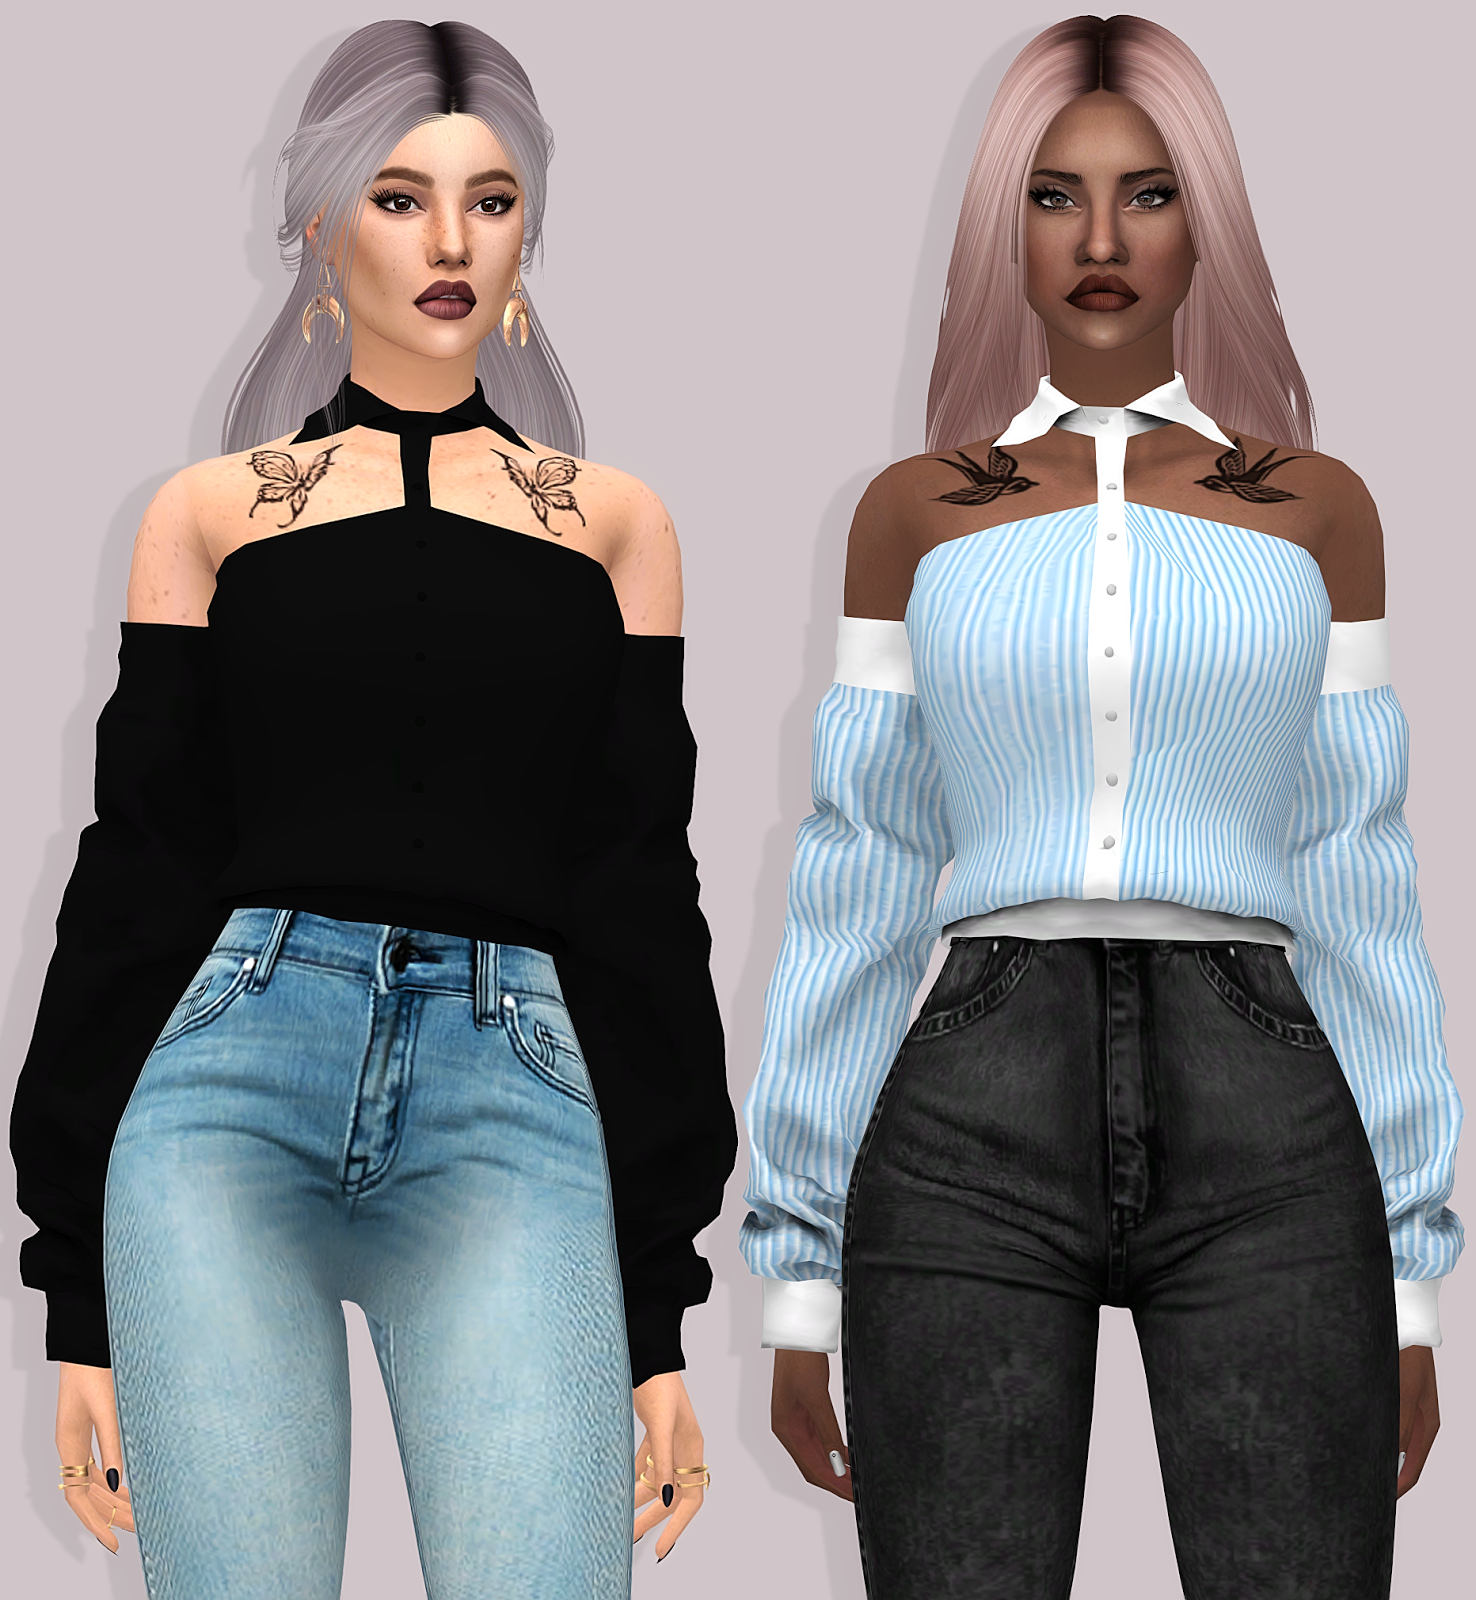 Sims 4 CC's The Best Clothing by Lumy Sims